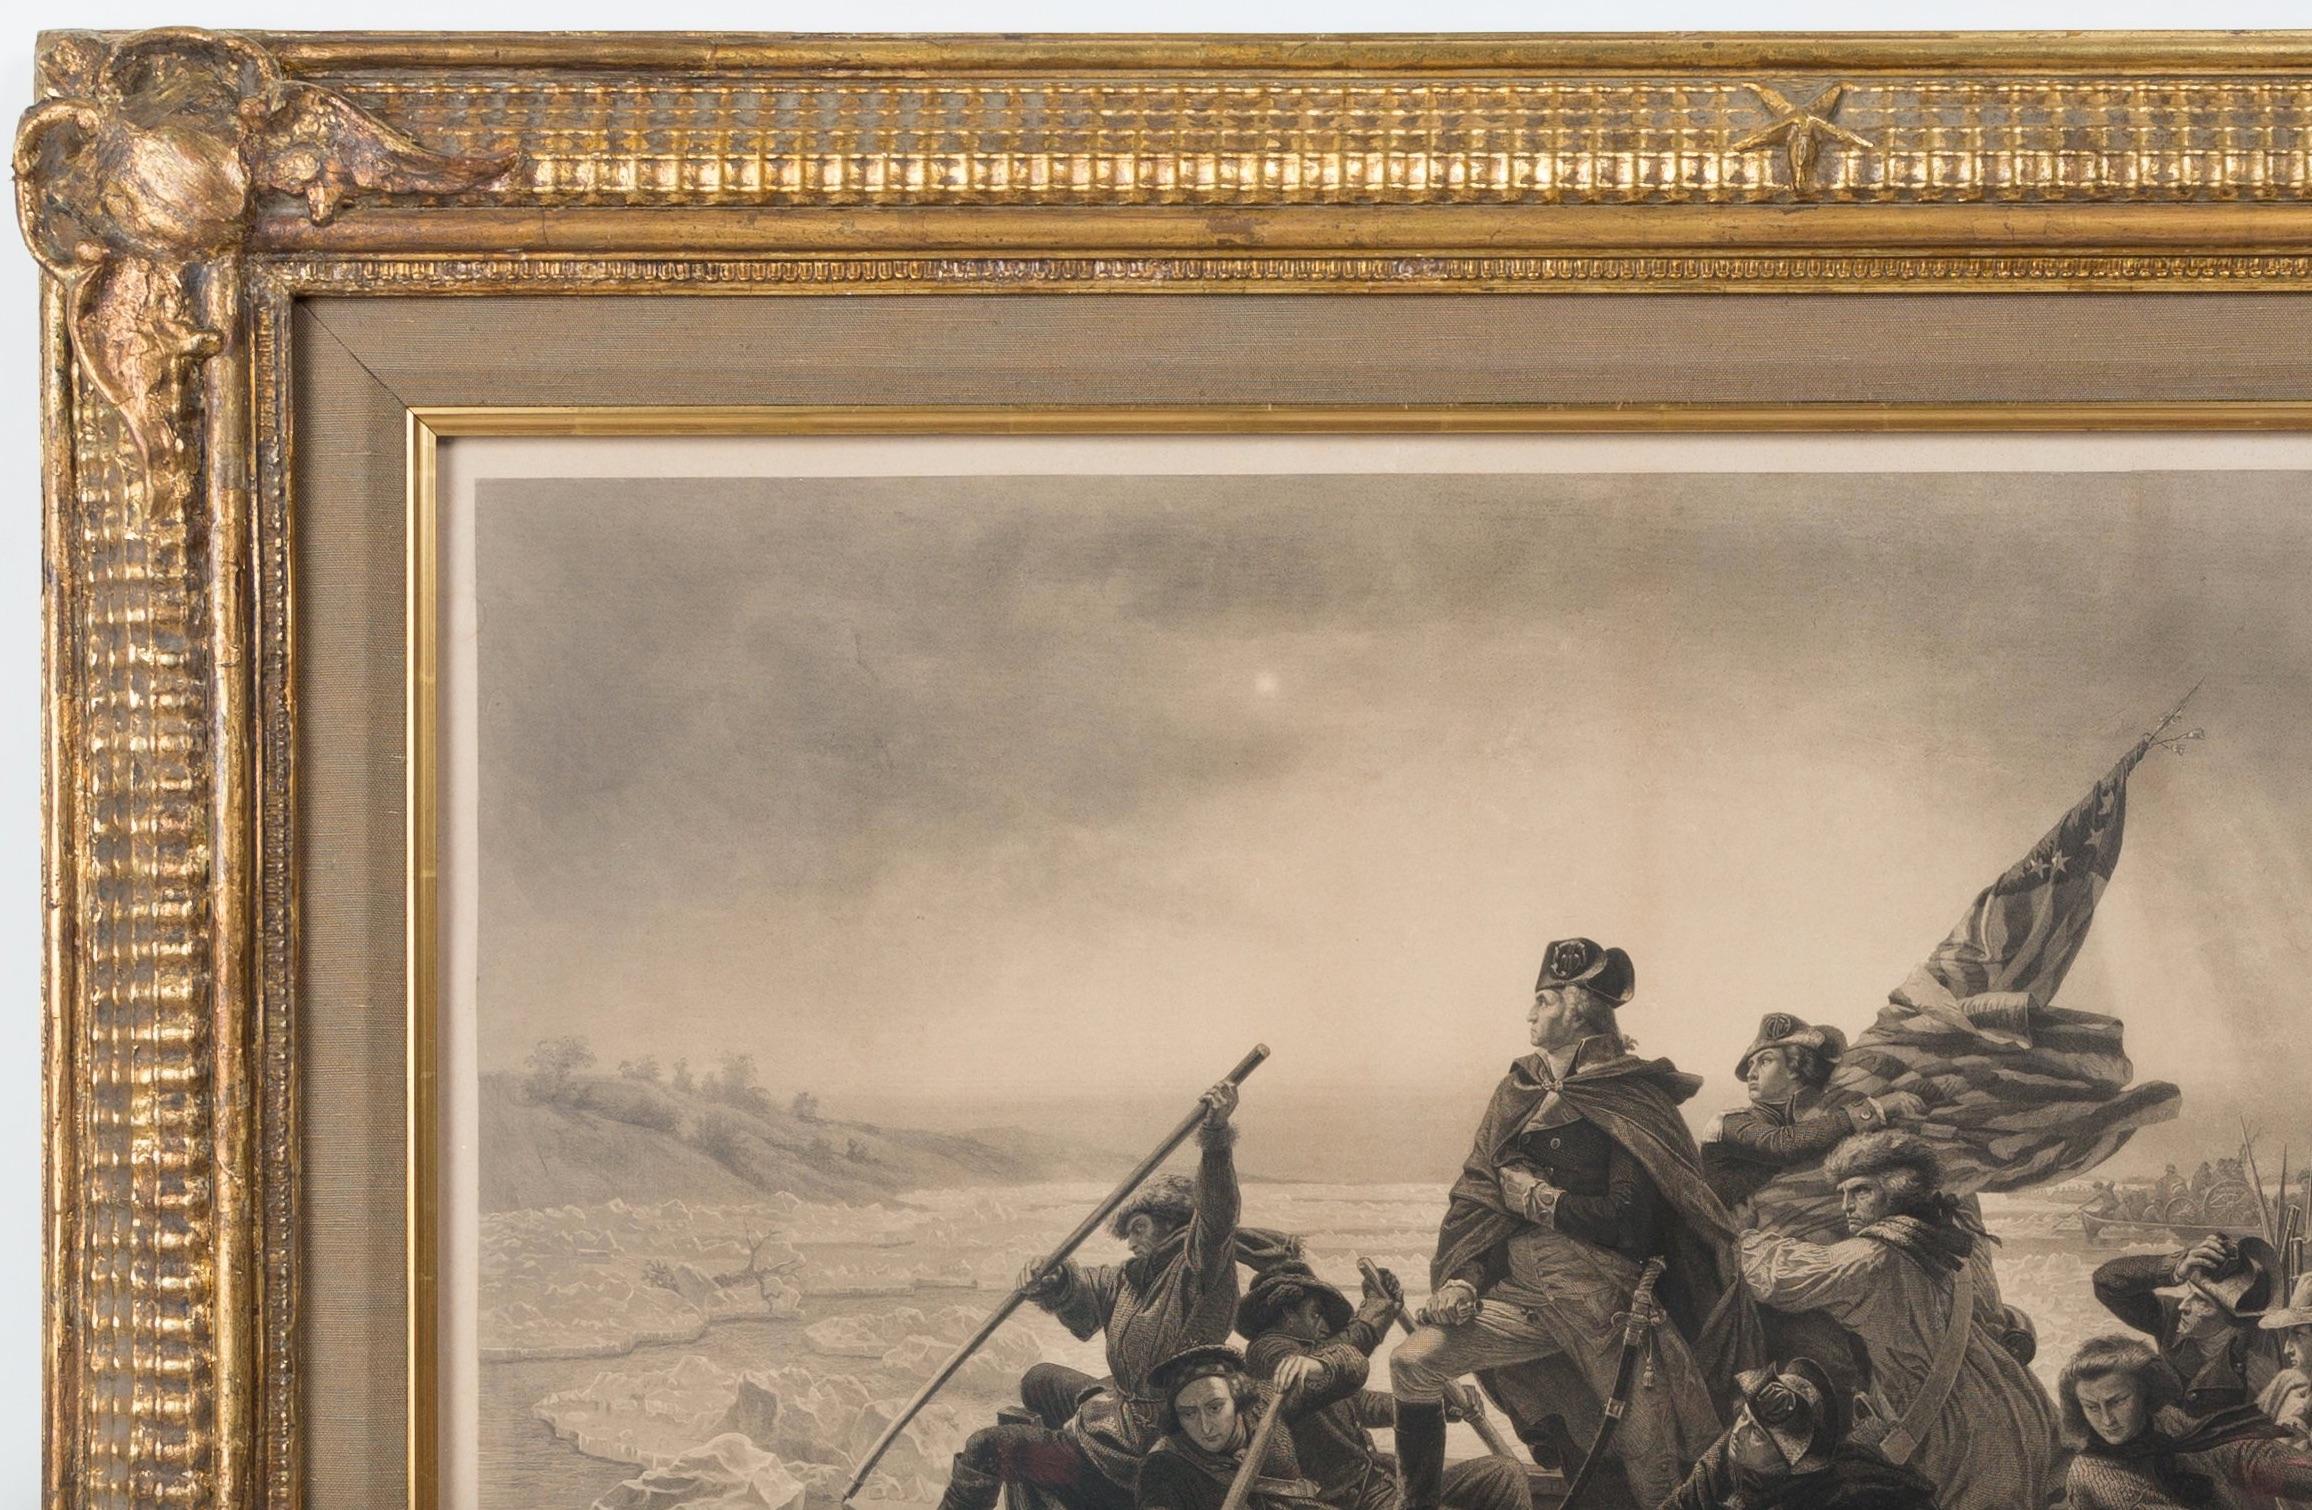 1853 Washington crossing the Delaware engraving by Paul Girardet, after Emanuel Leutze, in period gilt frame

This finely executed engraving is after the important early painting, Washington Crossing the Delaware, an oil-on-canvas by the German